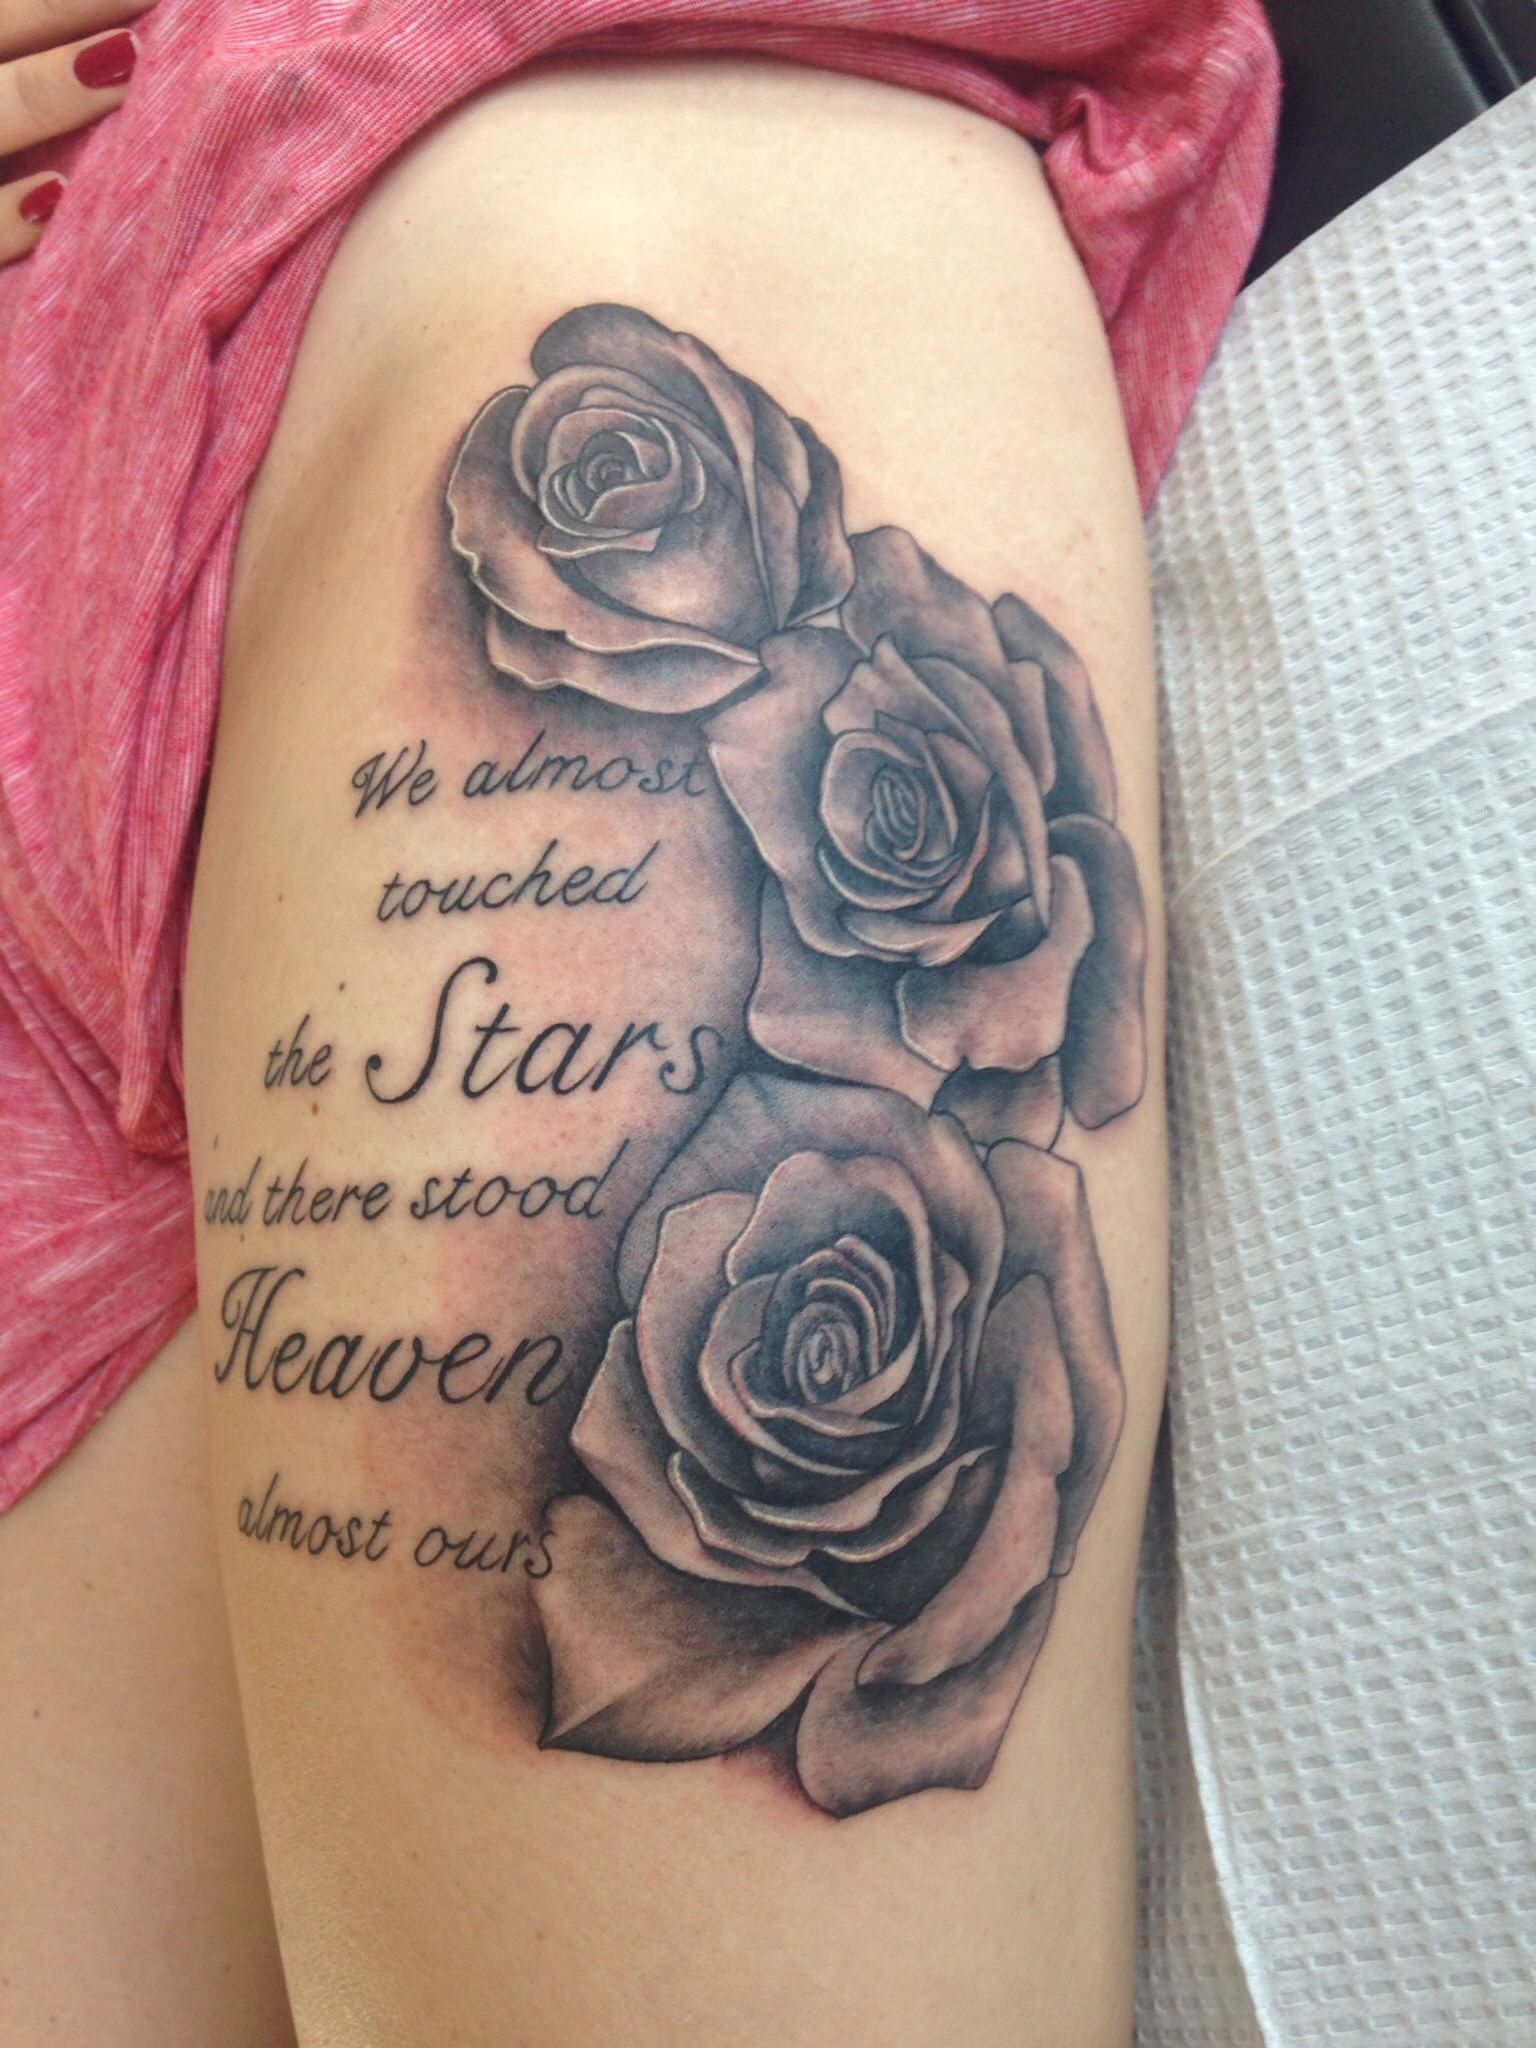 Best Rose Tattoo Ever Memorial Tattoo Love You Grandma My Style throughout proportions 1536 X 2048